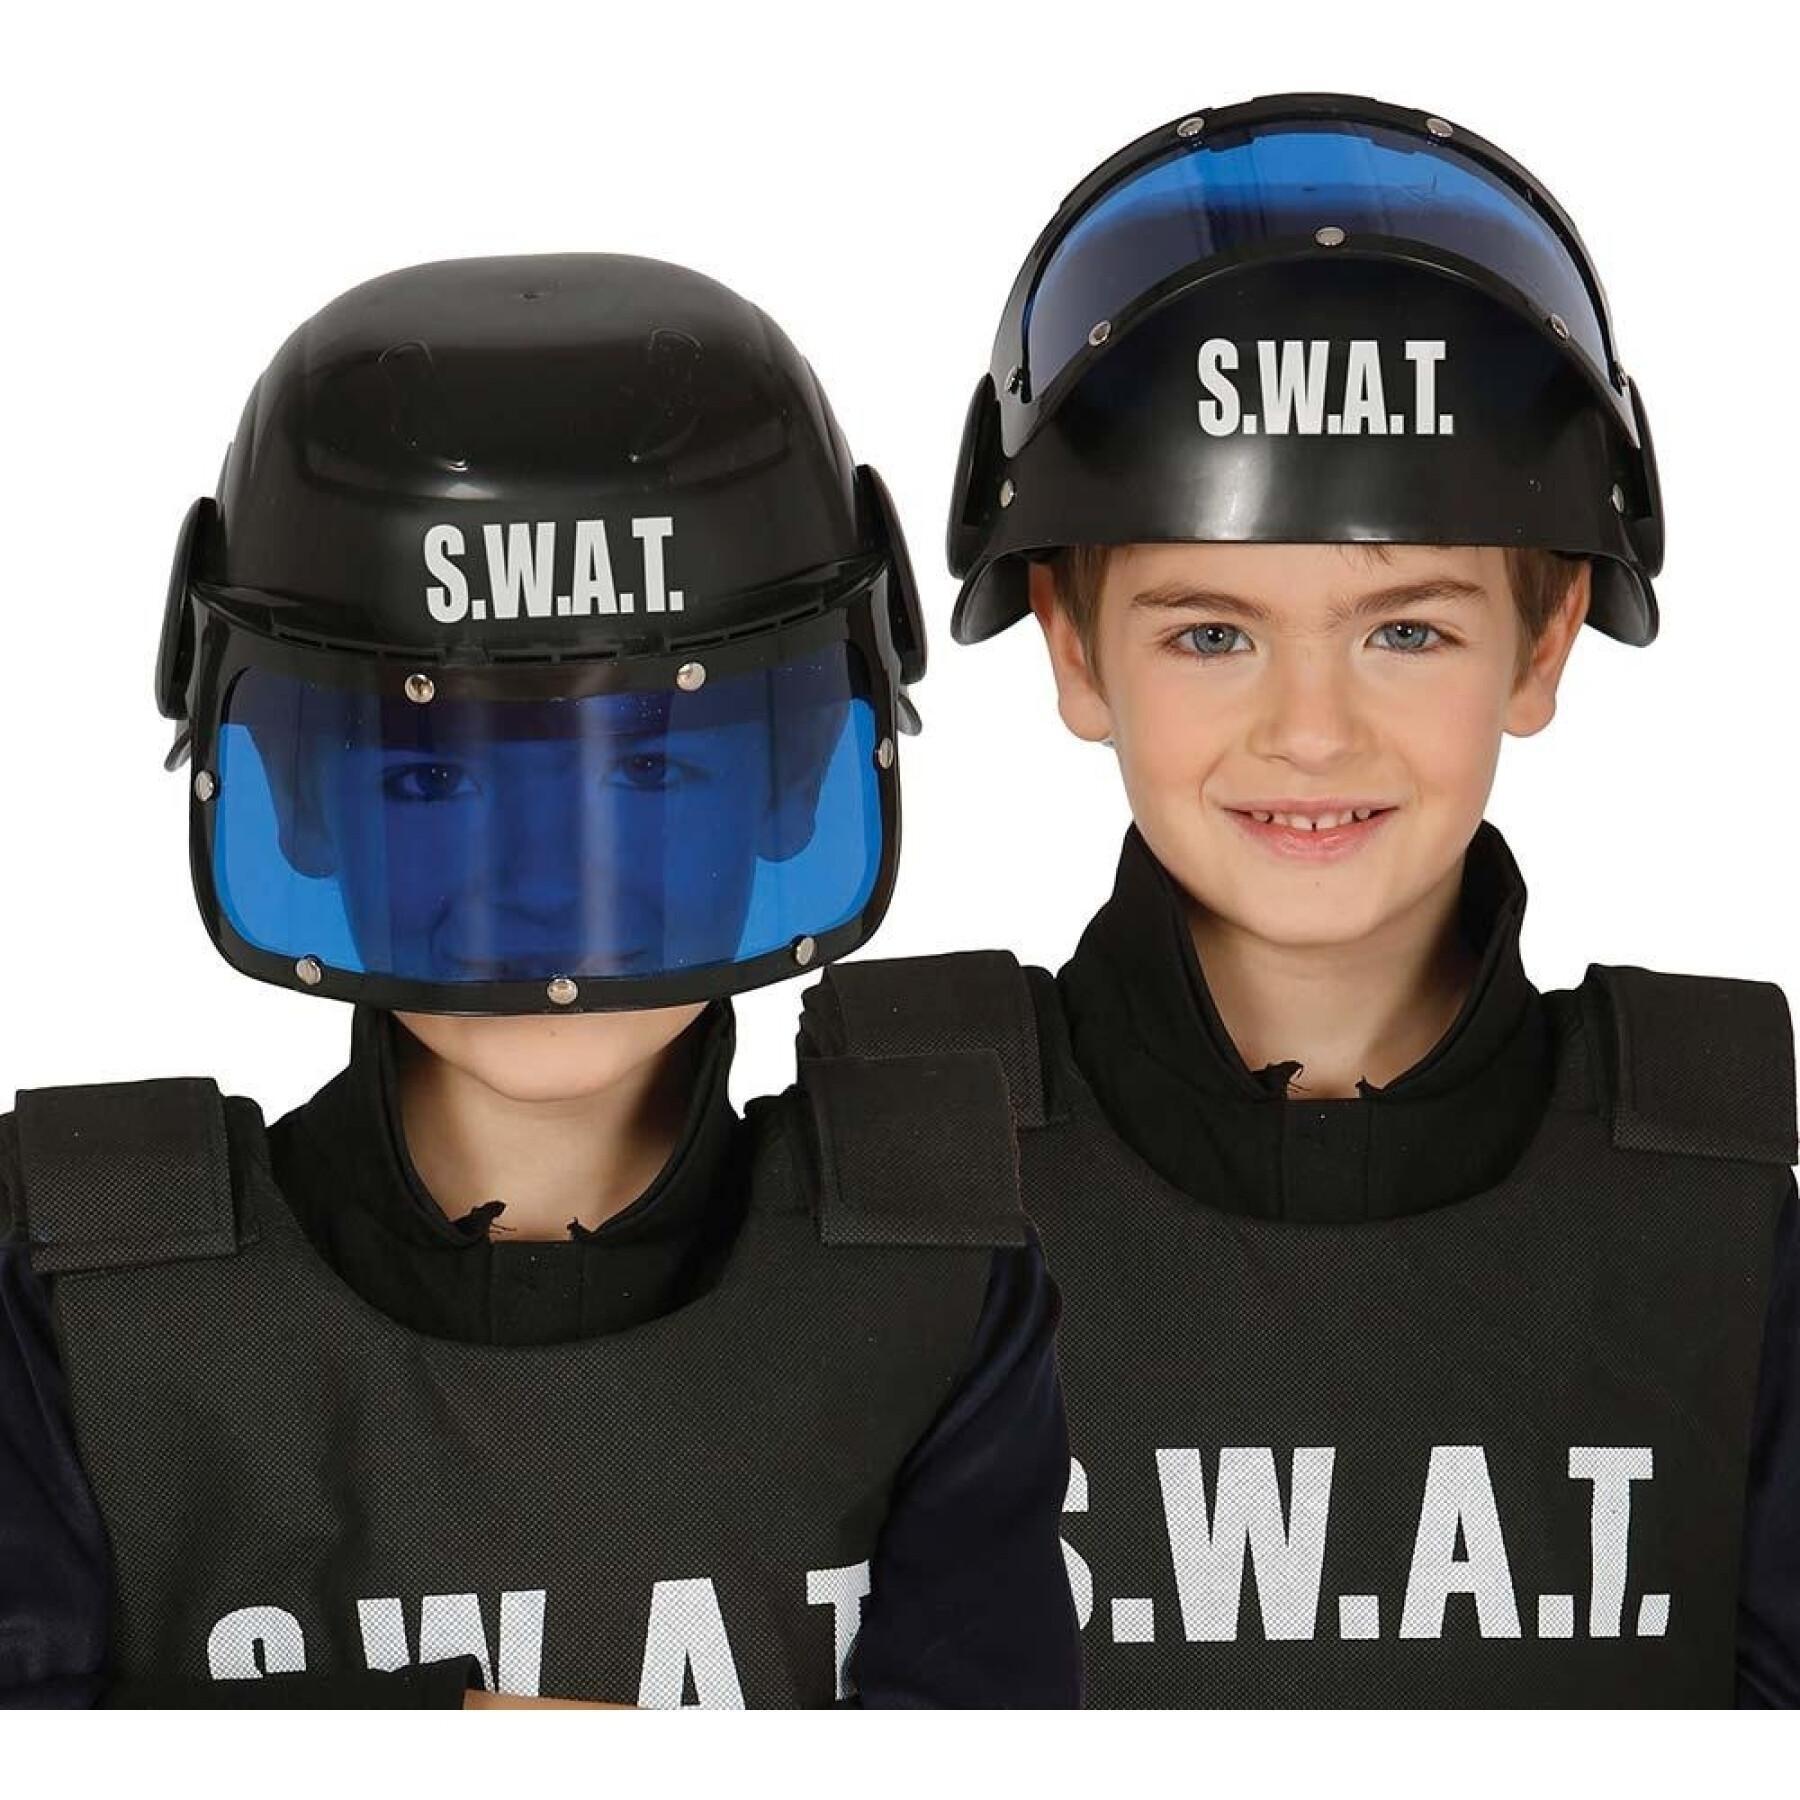 https://media.sneakids.fr/catalog/product/cache/image/1800x/9df78eab33525d08d6e5fb8d27136e95/s/w/swat_437232_0.jpg